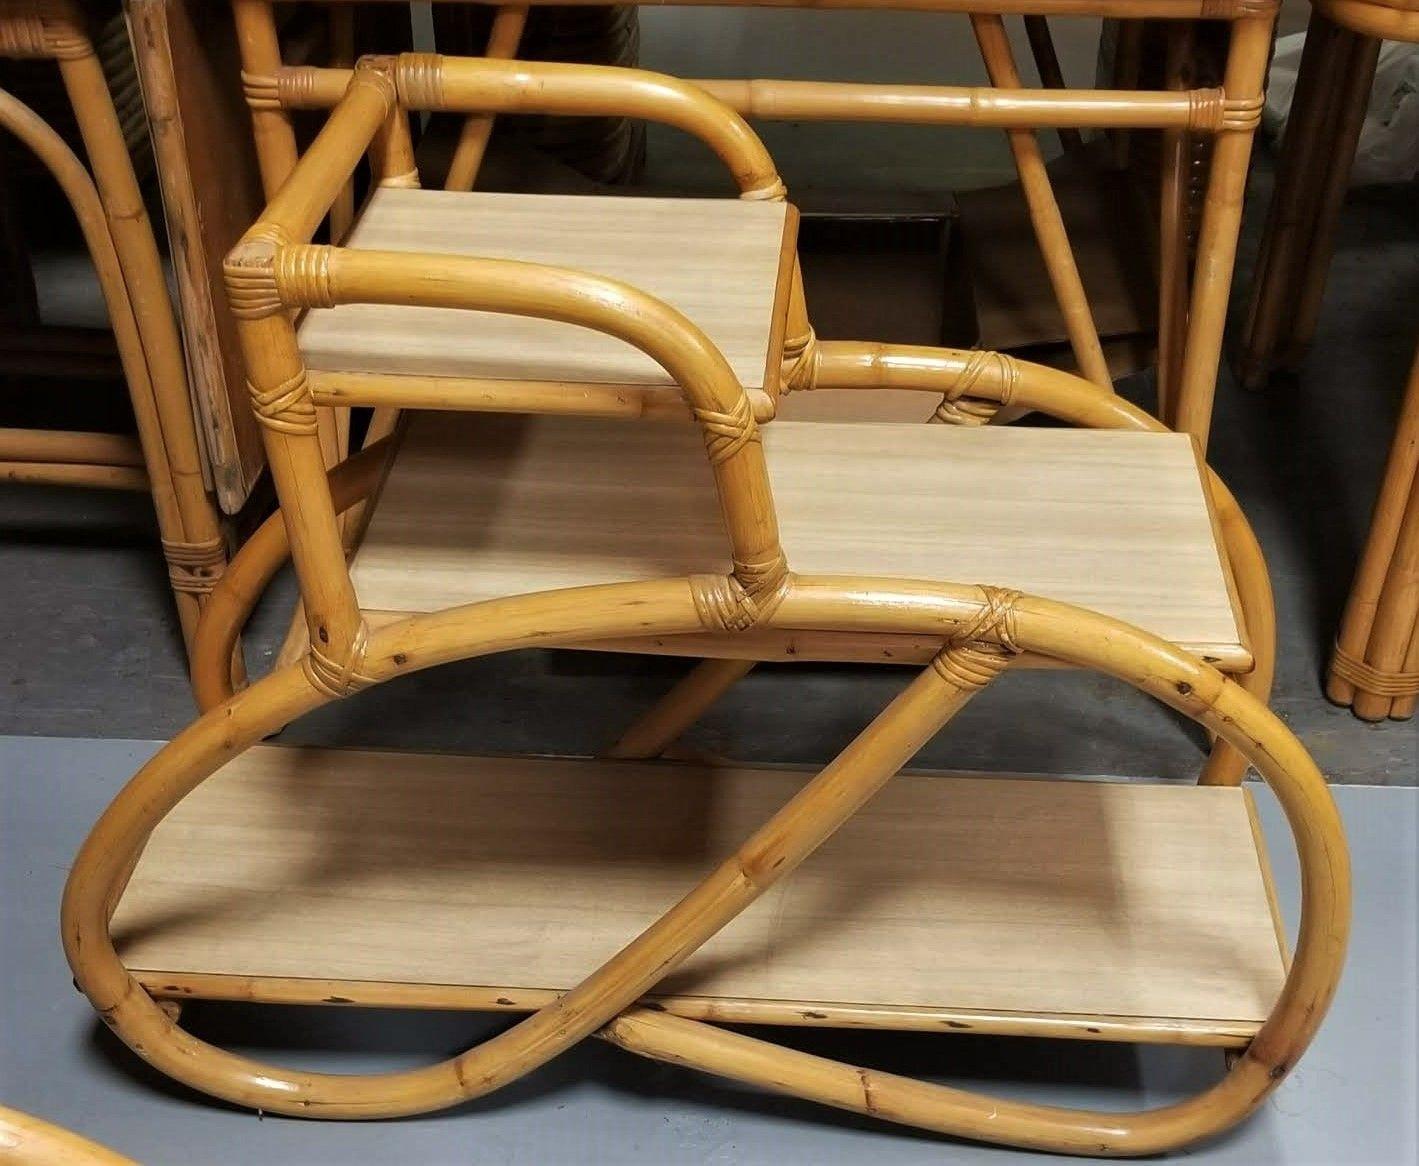 Rattan side table 3-tier of shelves with 1 strand 3/4 pretzel rattan arm and a soft beige Formica table top finish - Set of 2. Perfect alongside your bed or sofa.
Circa 1950, USA
We only purchase and sell only the best and finest rattan furniture